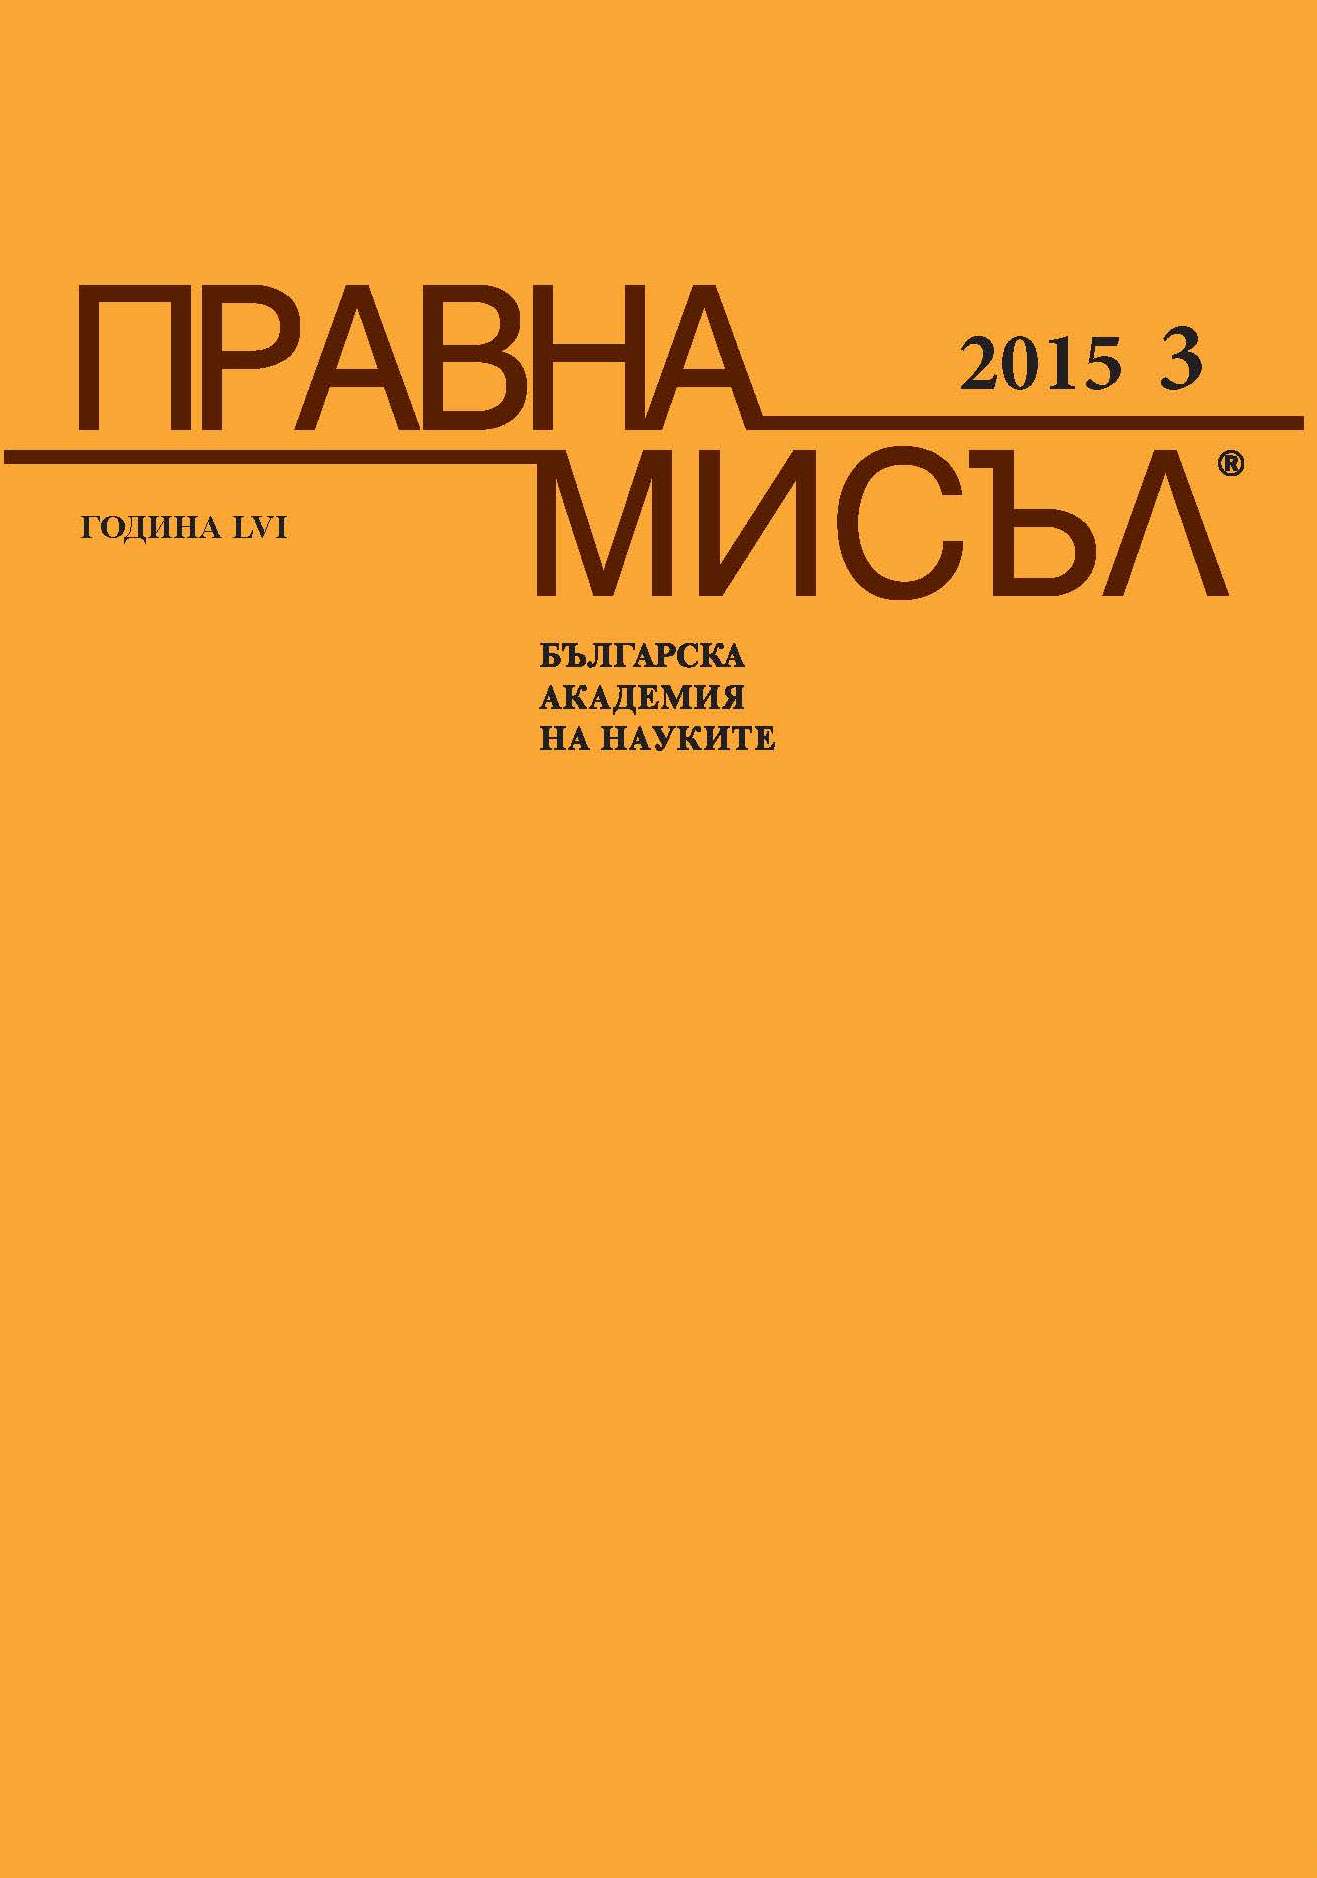 Petko Staynov’s contributions Cover Image